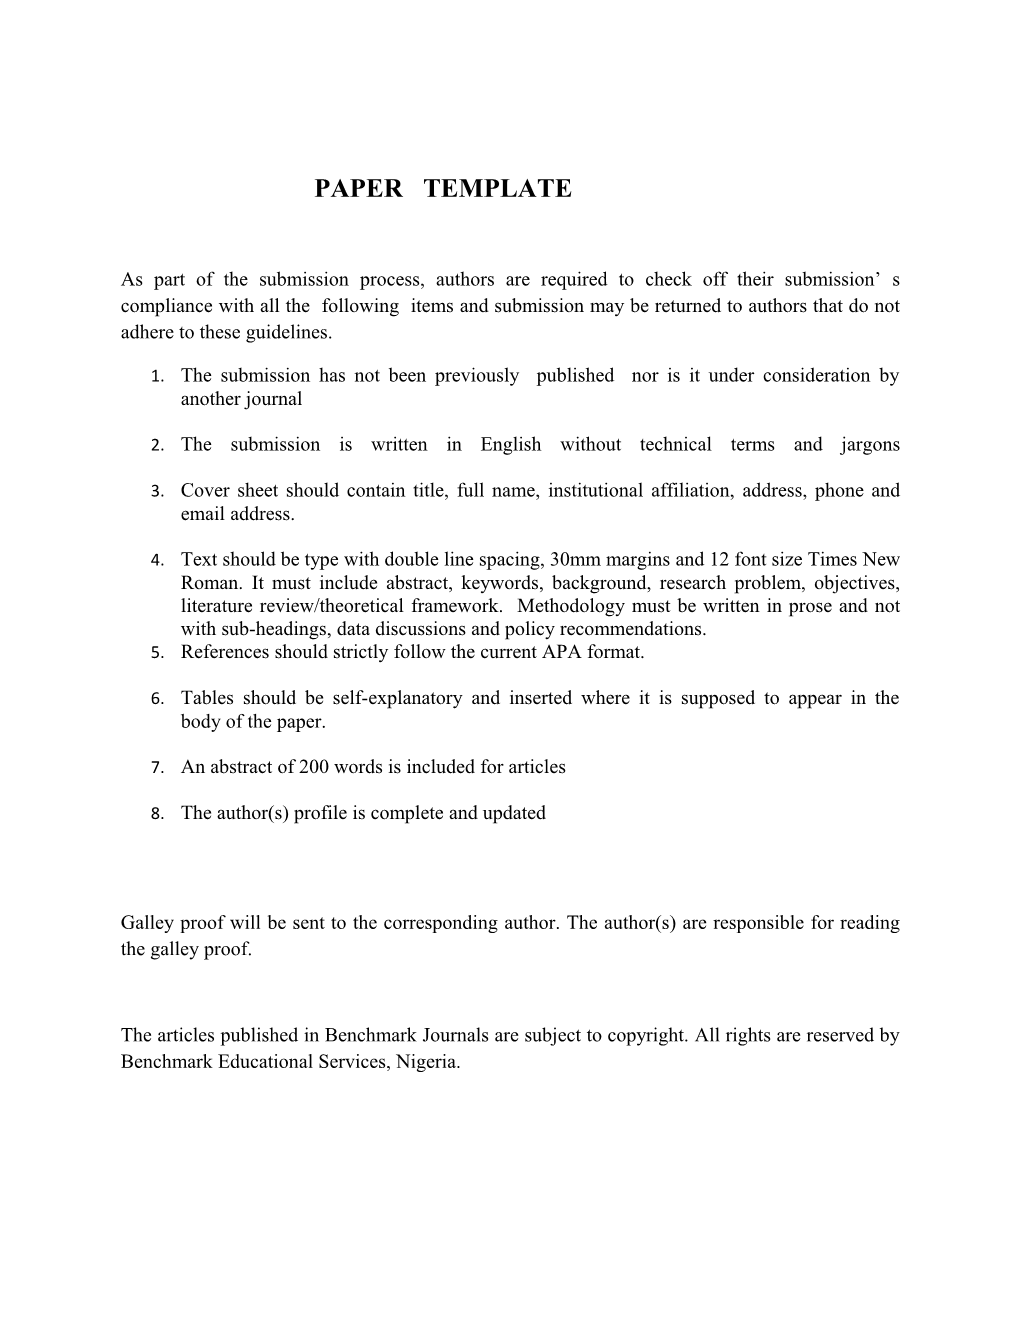 Guidelines for Perparation and Submission of Manuscripts To